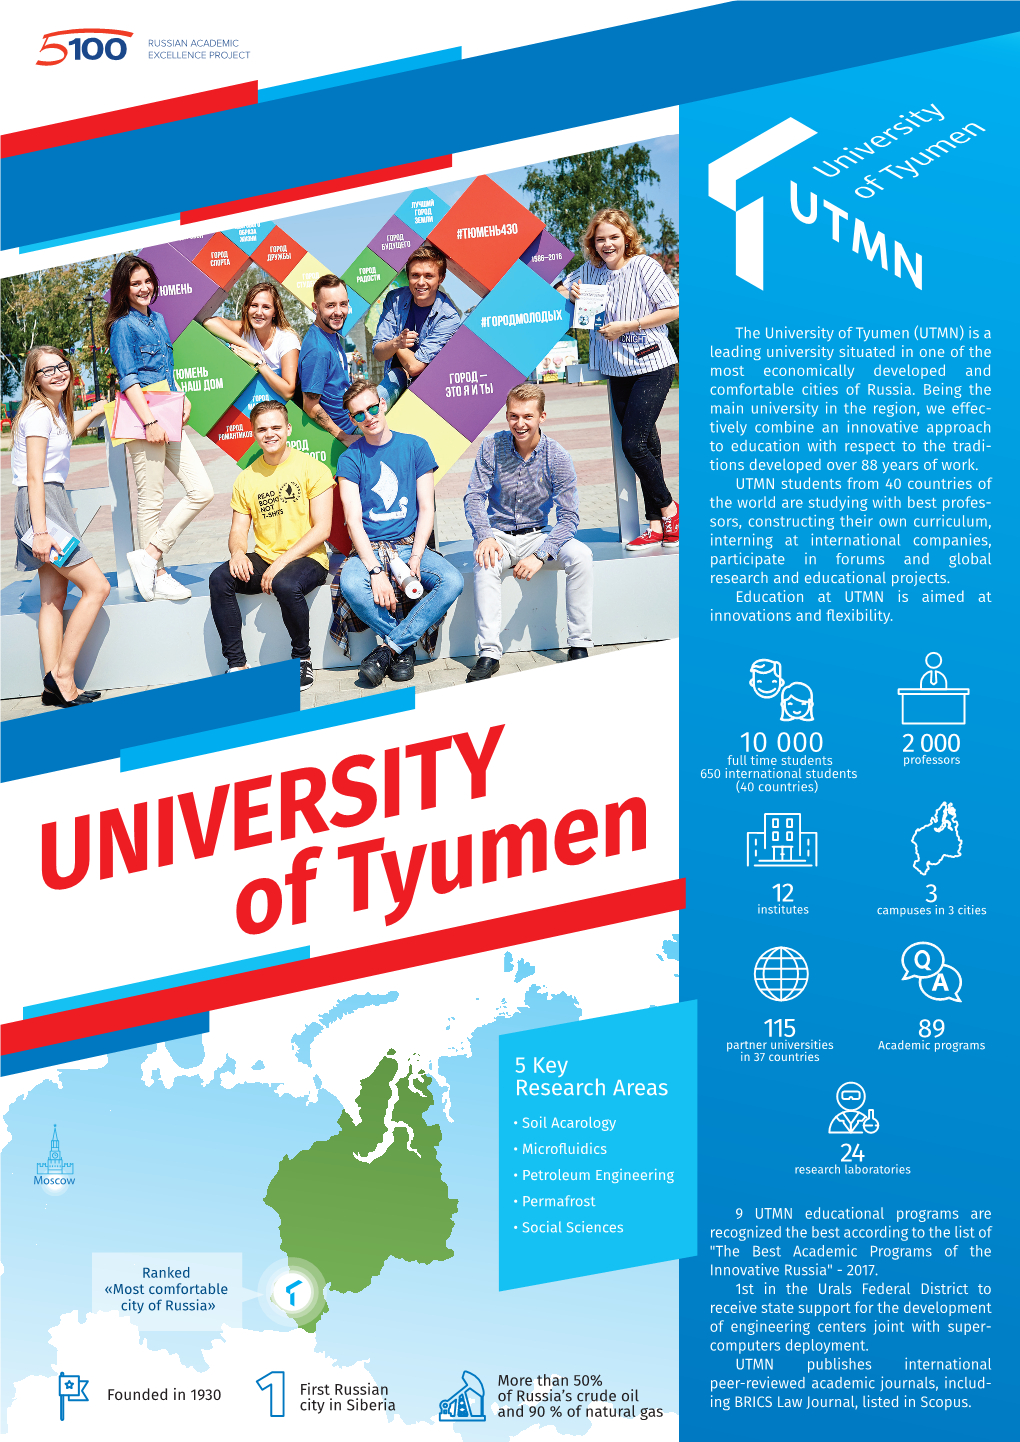 University of Tyumen (UTMN) Is a Leading University Situated in One of the Most Economically Developed and Comfortable Cities of Russia